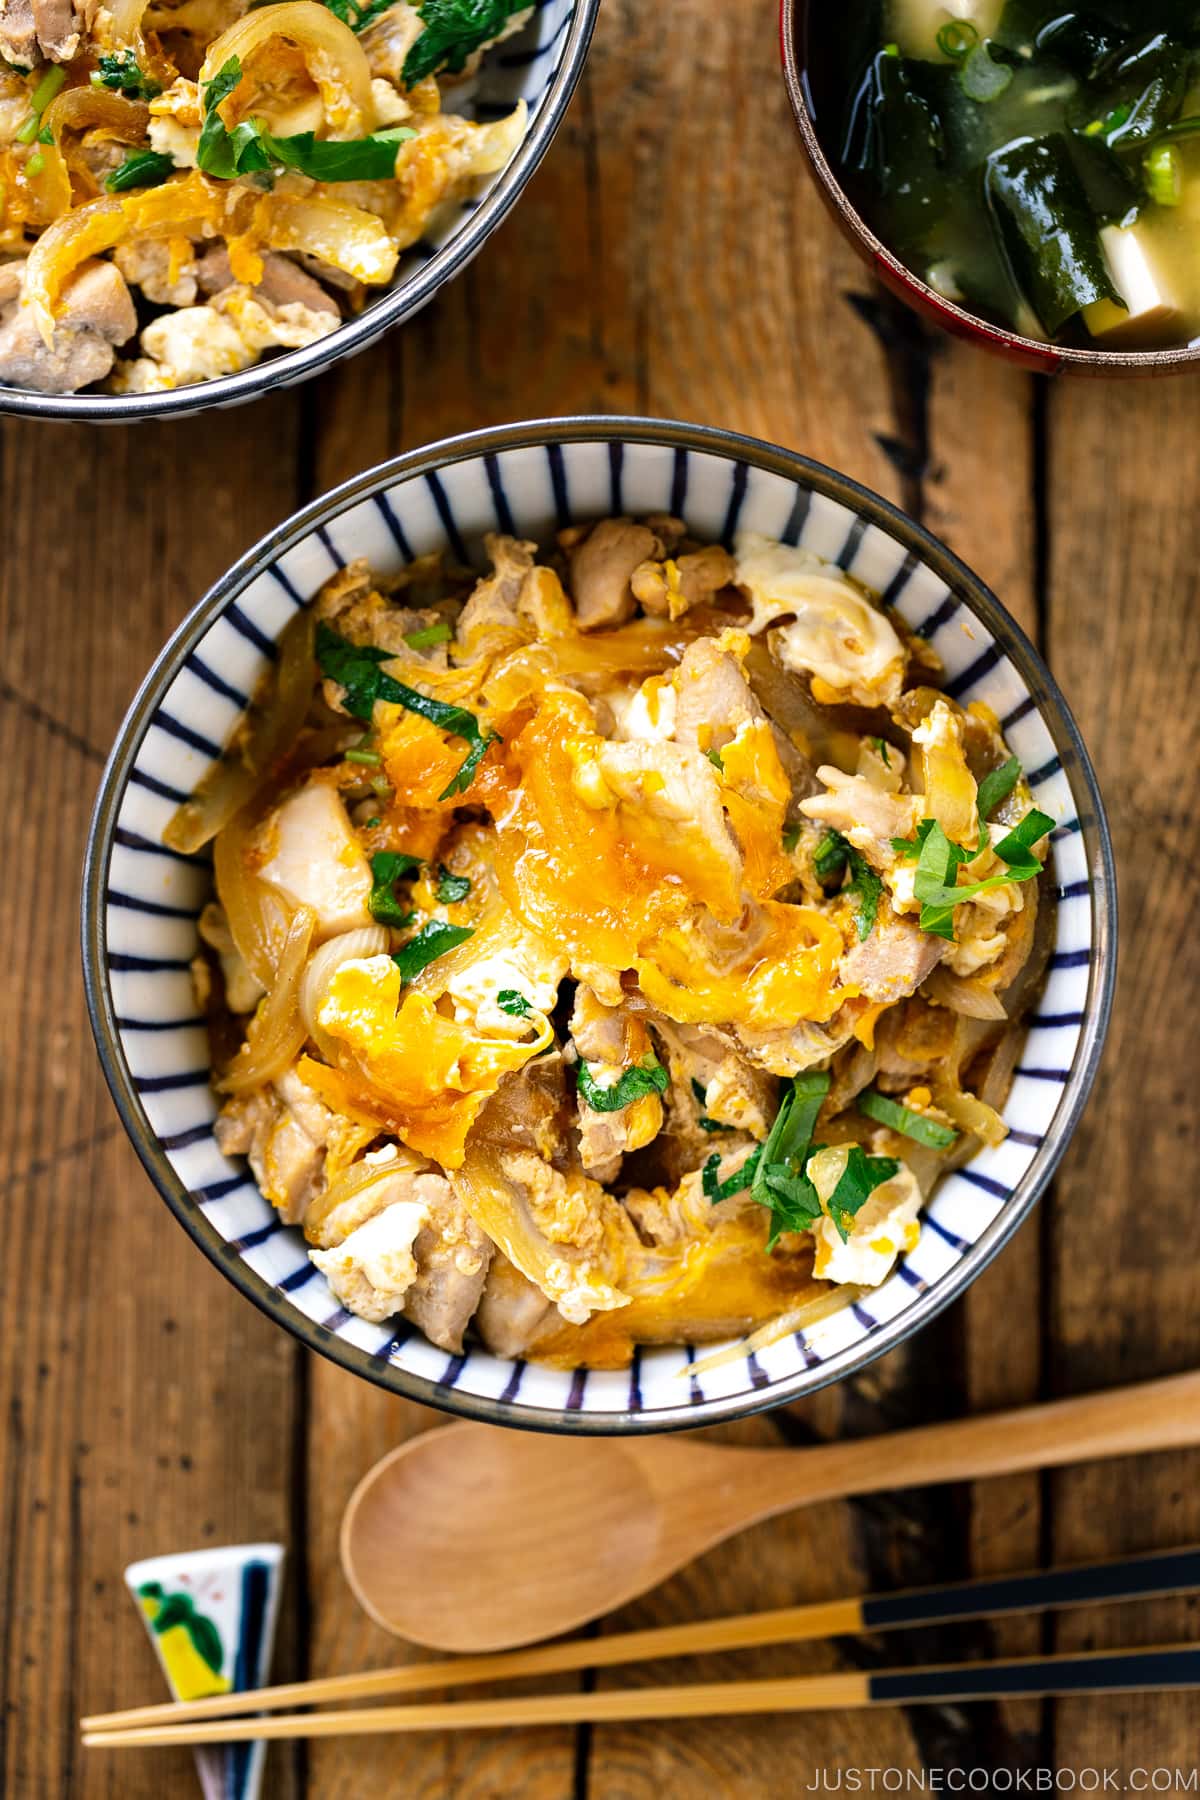 A Japanese donburi bowl containing Oyakodon, chicken and egg rice bowl.